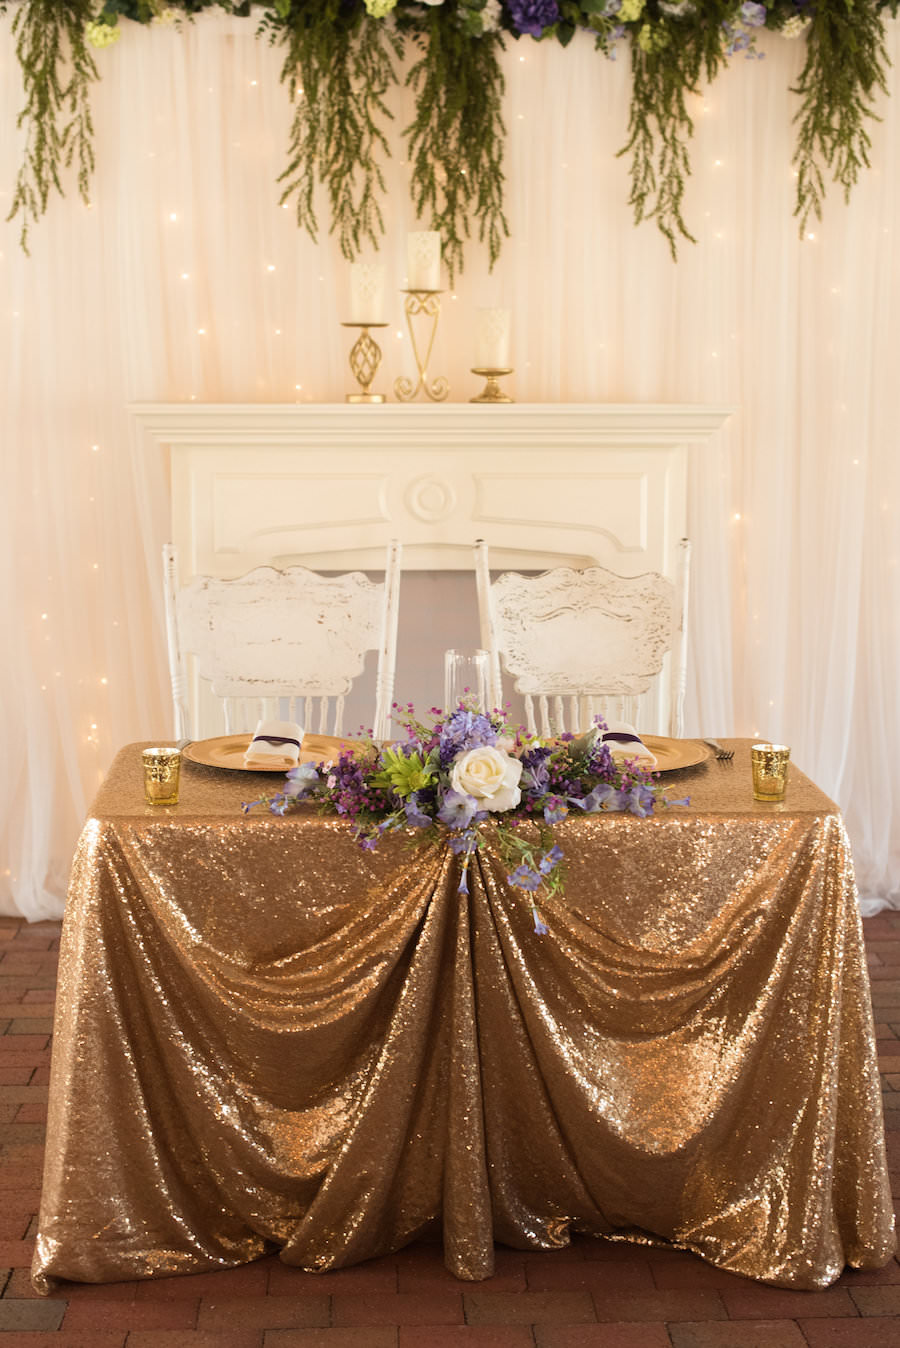 Bride and Groom Rustic Glam Sweetheart Table with Gold Sequin Linen and Purple and Ivory Centerpieces and Vintage Chairs at Tampa Wedding Venue Cross Creek Ranch